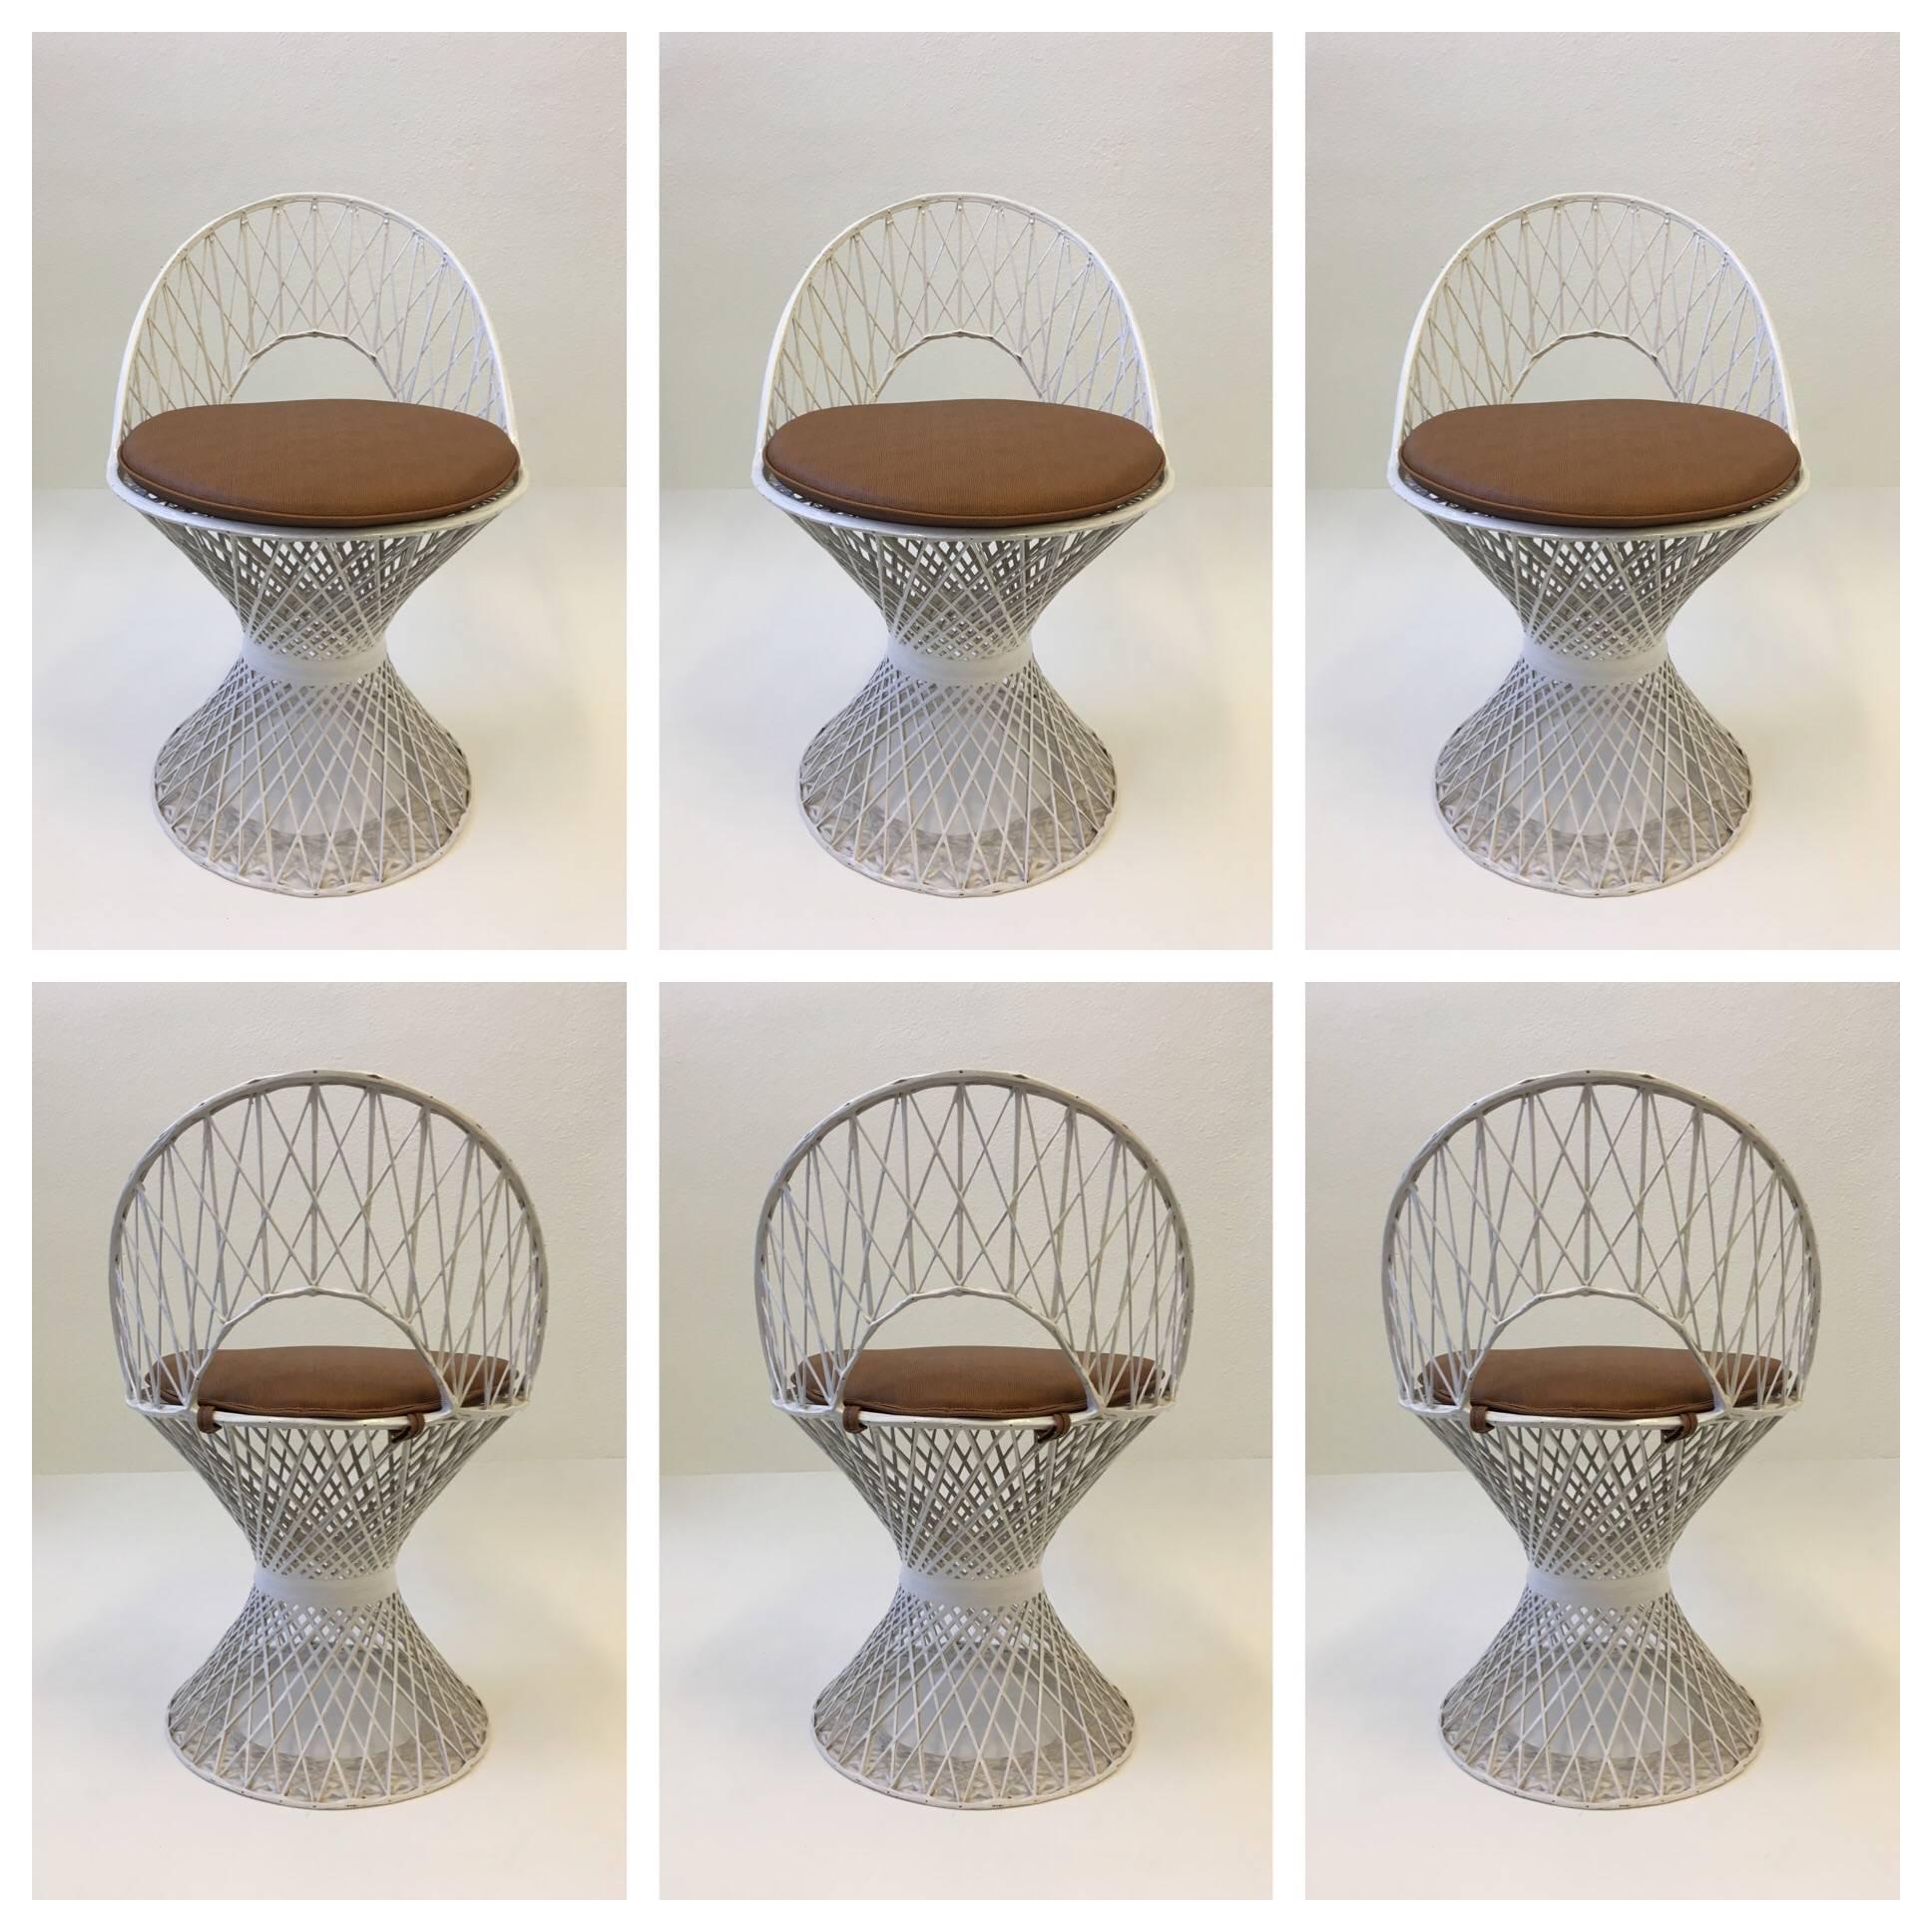 A beautiful set of six spun white fiberglass dining chairs design by Russell Woodard in the 1960s. The chairs have a lite brown faux snake skin Naugahyde seat (please see detail photos). 
Dimensions: 29.75